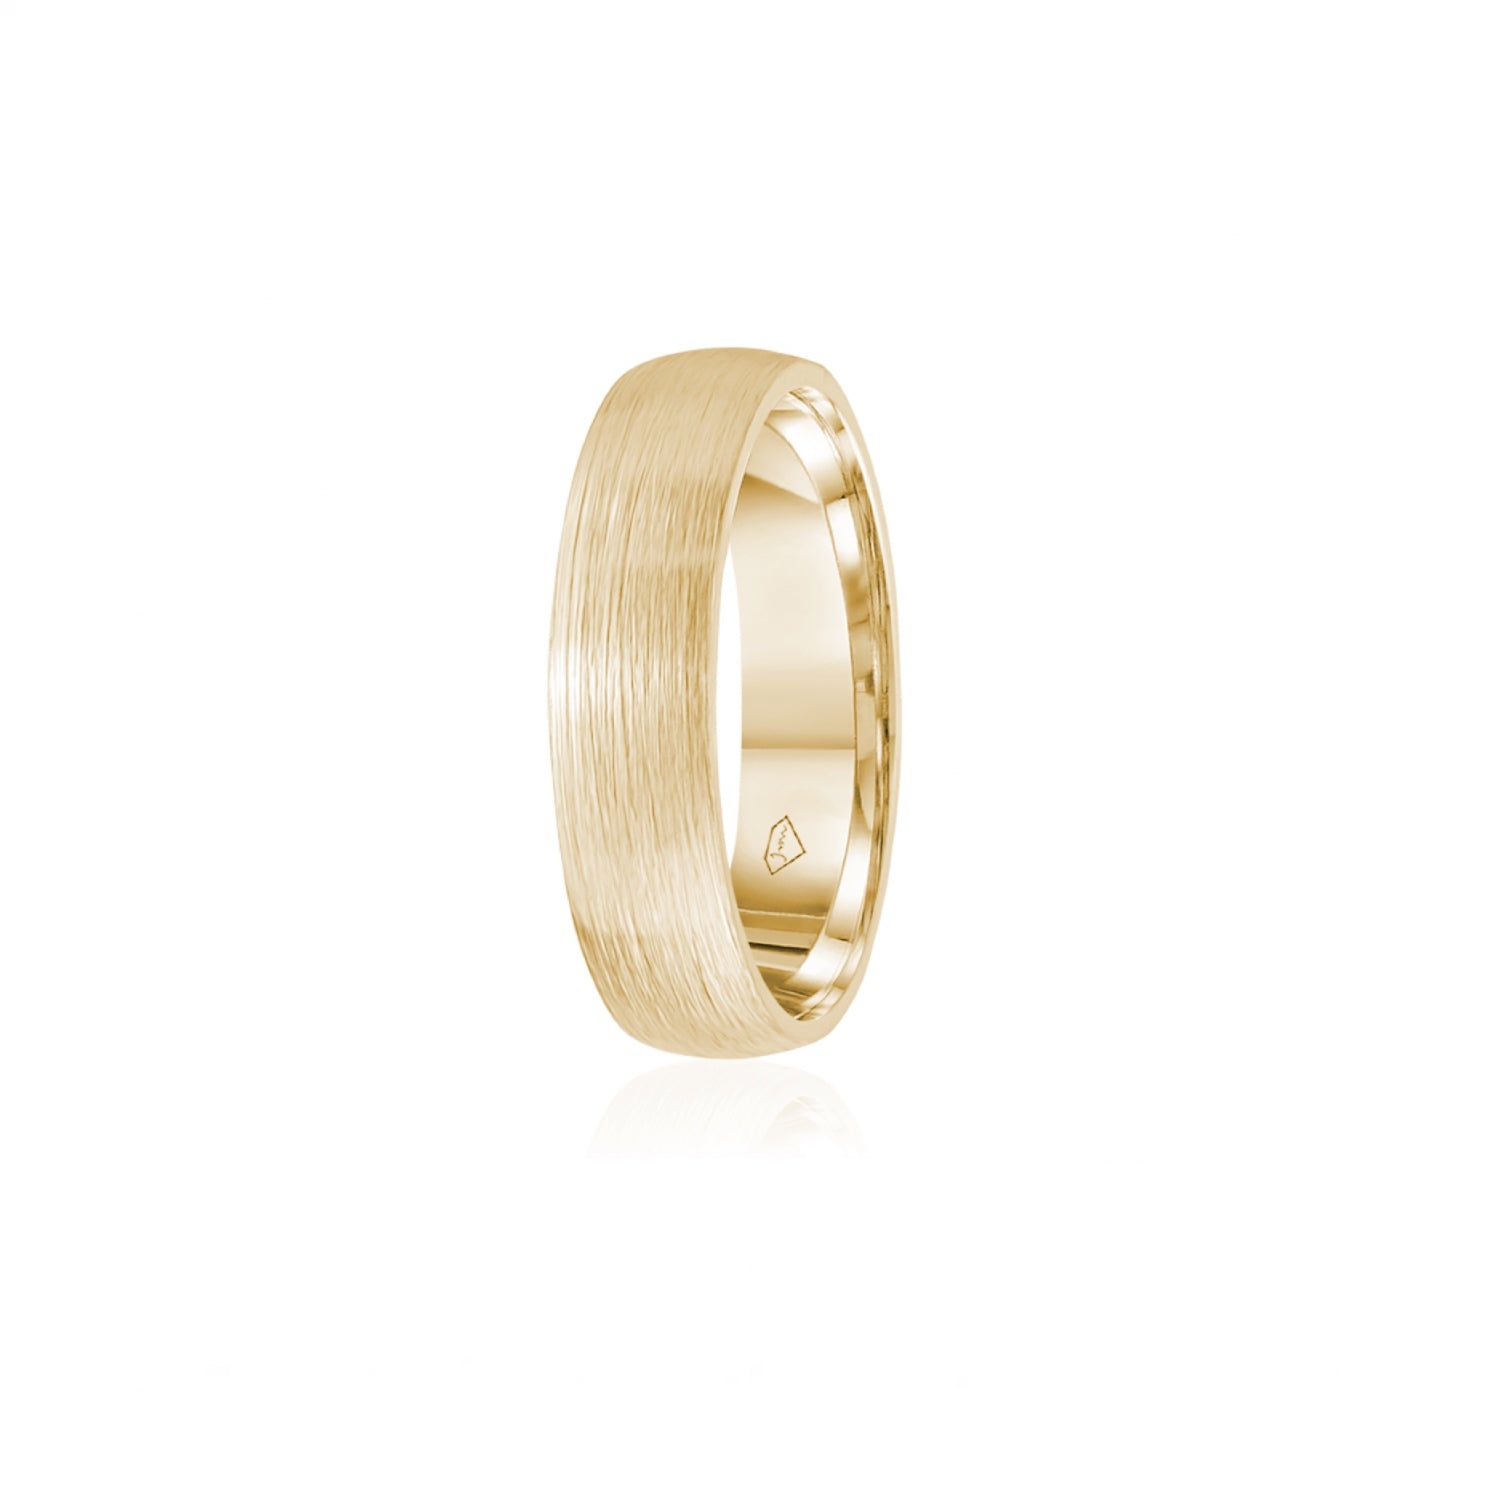 Brushed Finish Comfort Fit 8-9 mm Wedding Band in Yellow Gold